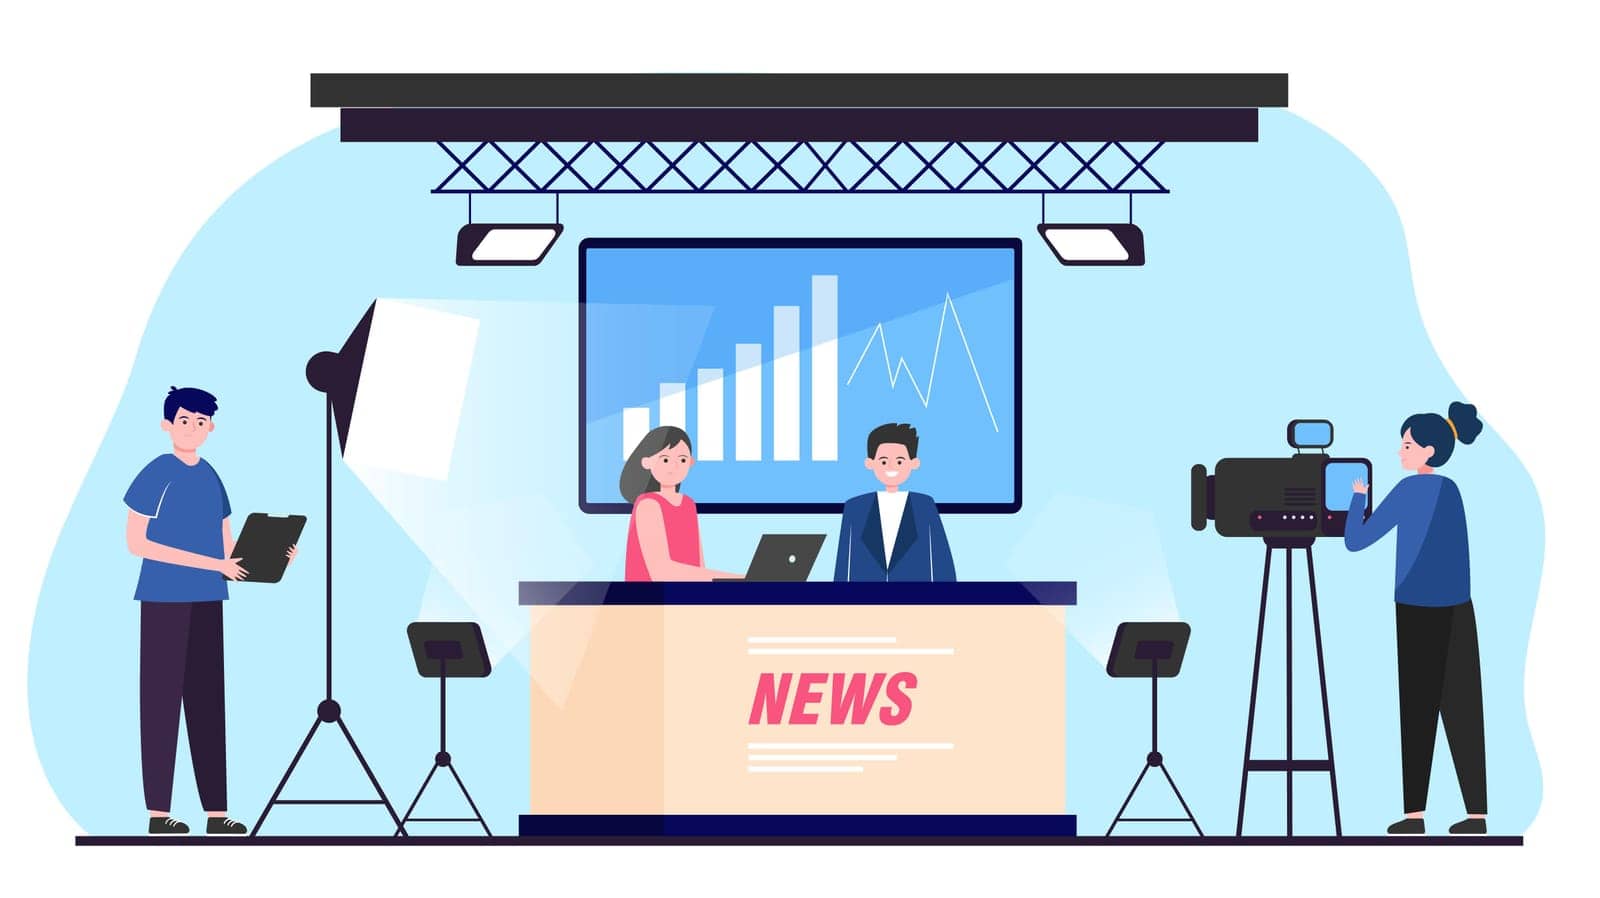 TV news show. Stage and backstage of studio filming with newscasters and camera crew. Vector illustration for reportage, news makers, broadcasting concept